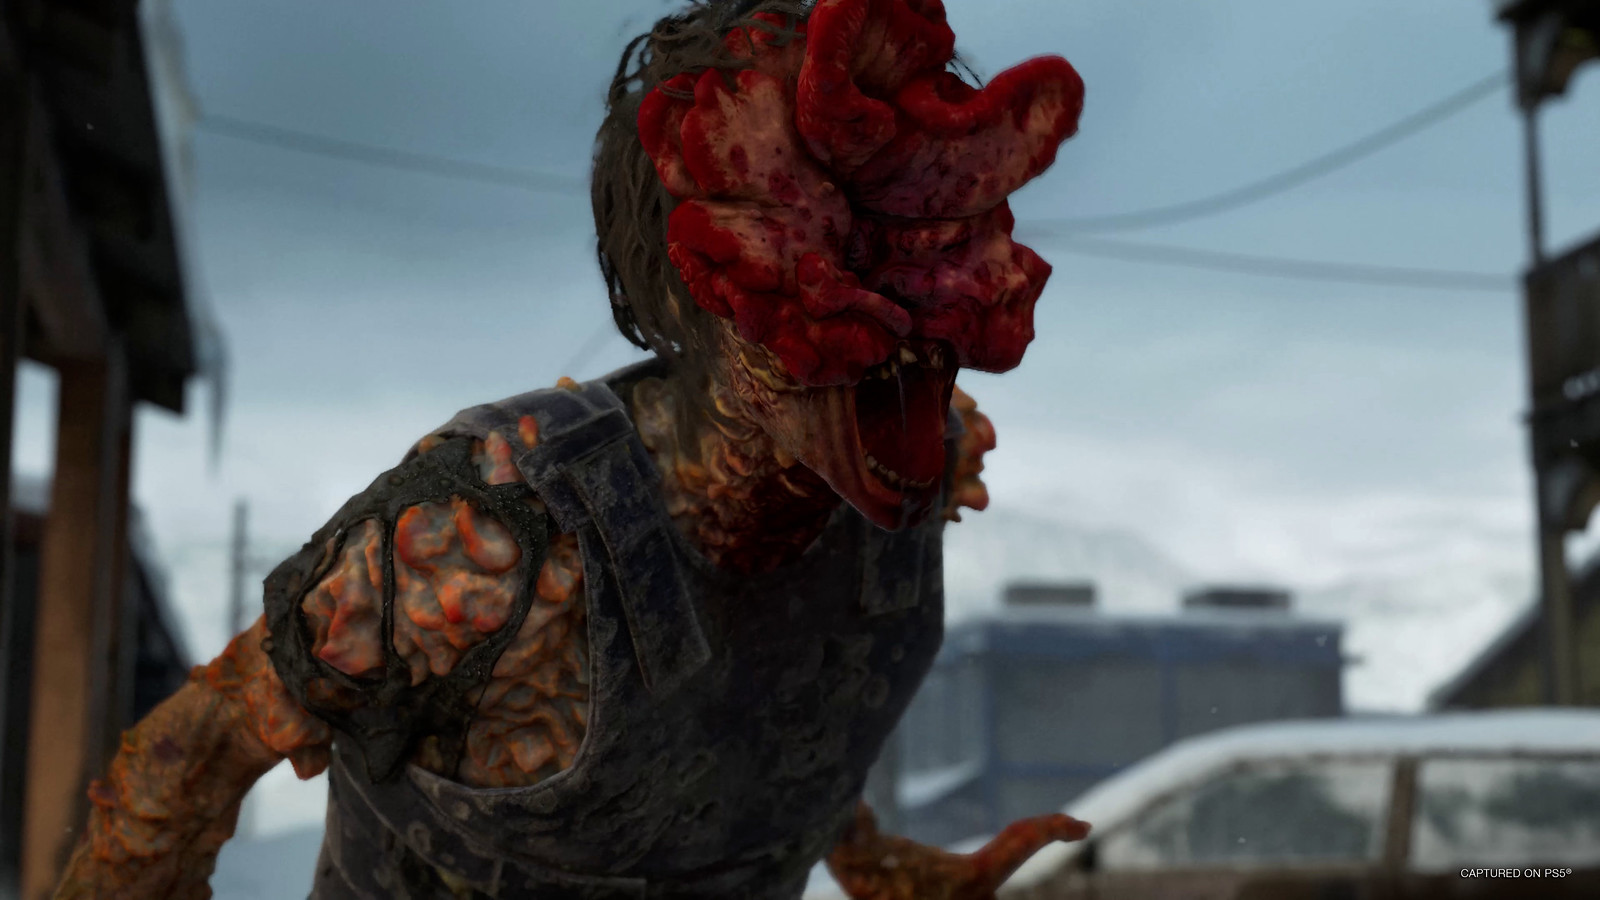 An in game screenshot of a Clicker in The Last of Us Part 2 Remastered